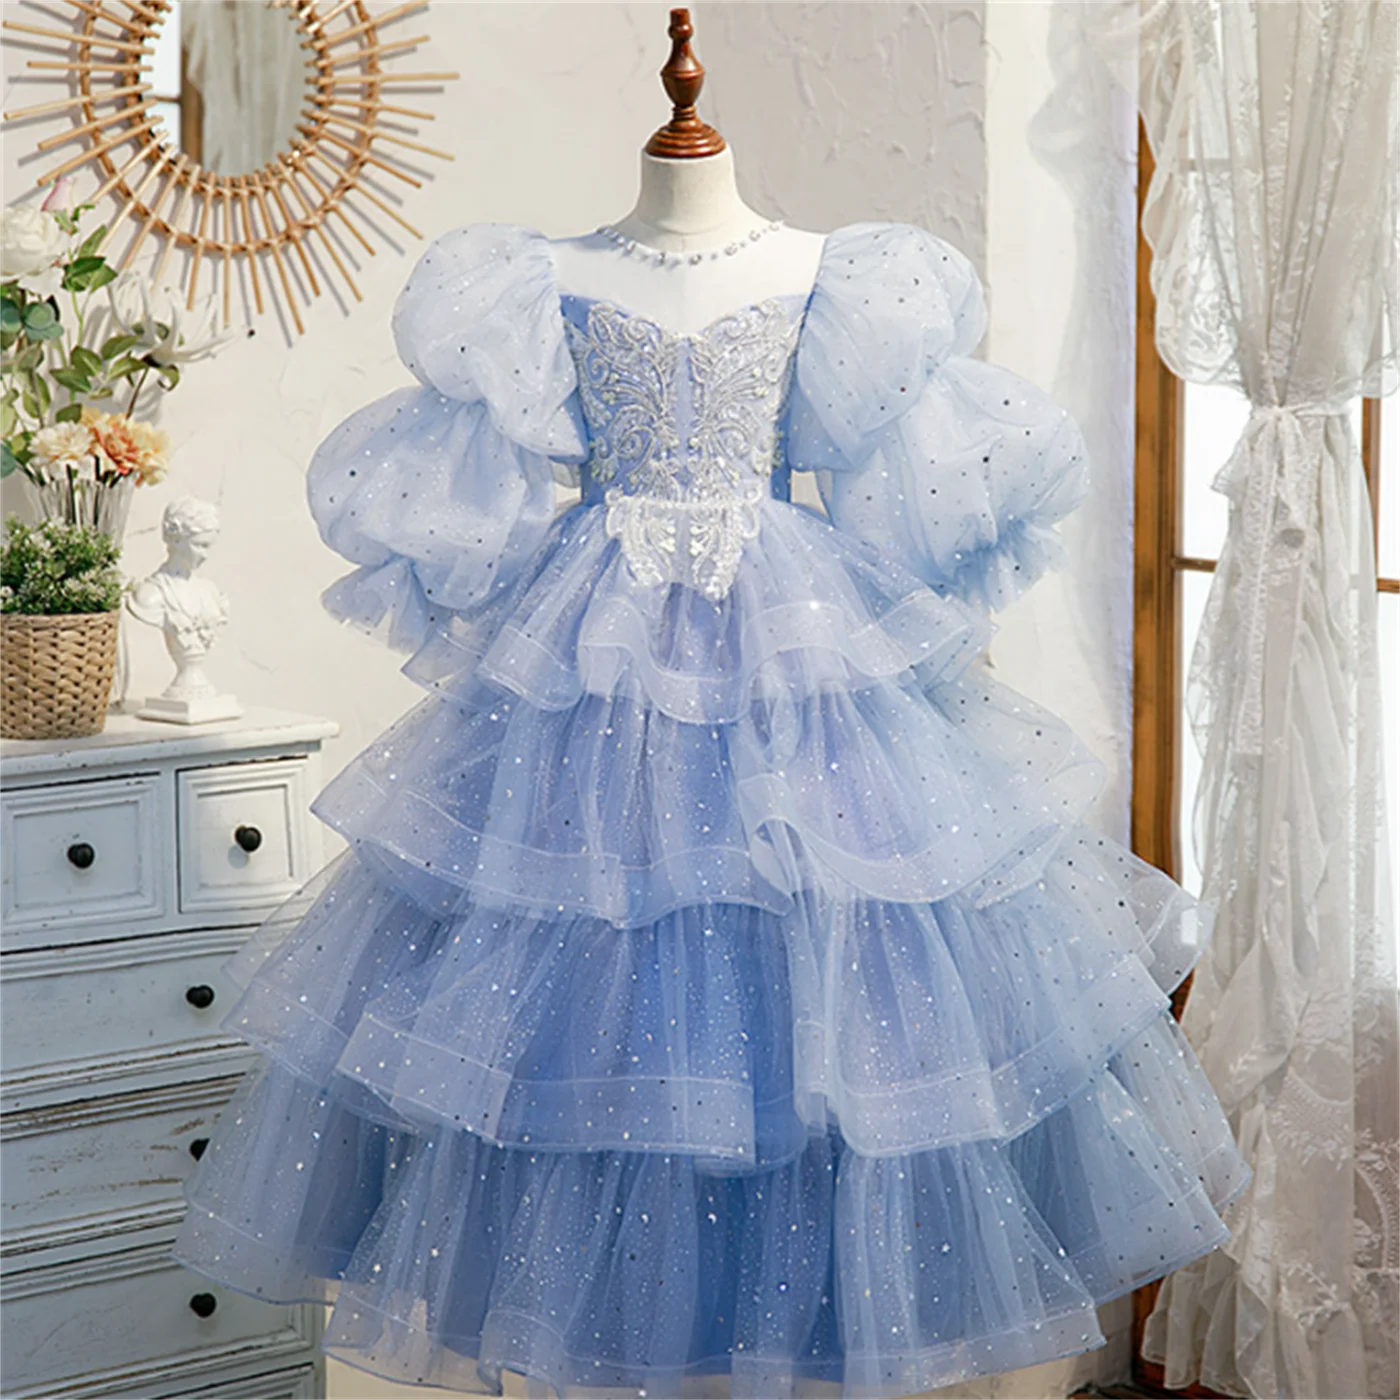 

Girl Communion Stylish White Flower Girls Dress for Wedding Party High Neck Baptism Gowns Tulle Full Sleeve Appliques Kid Holy